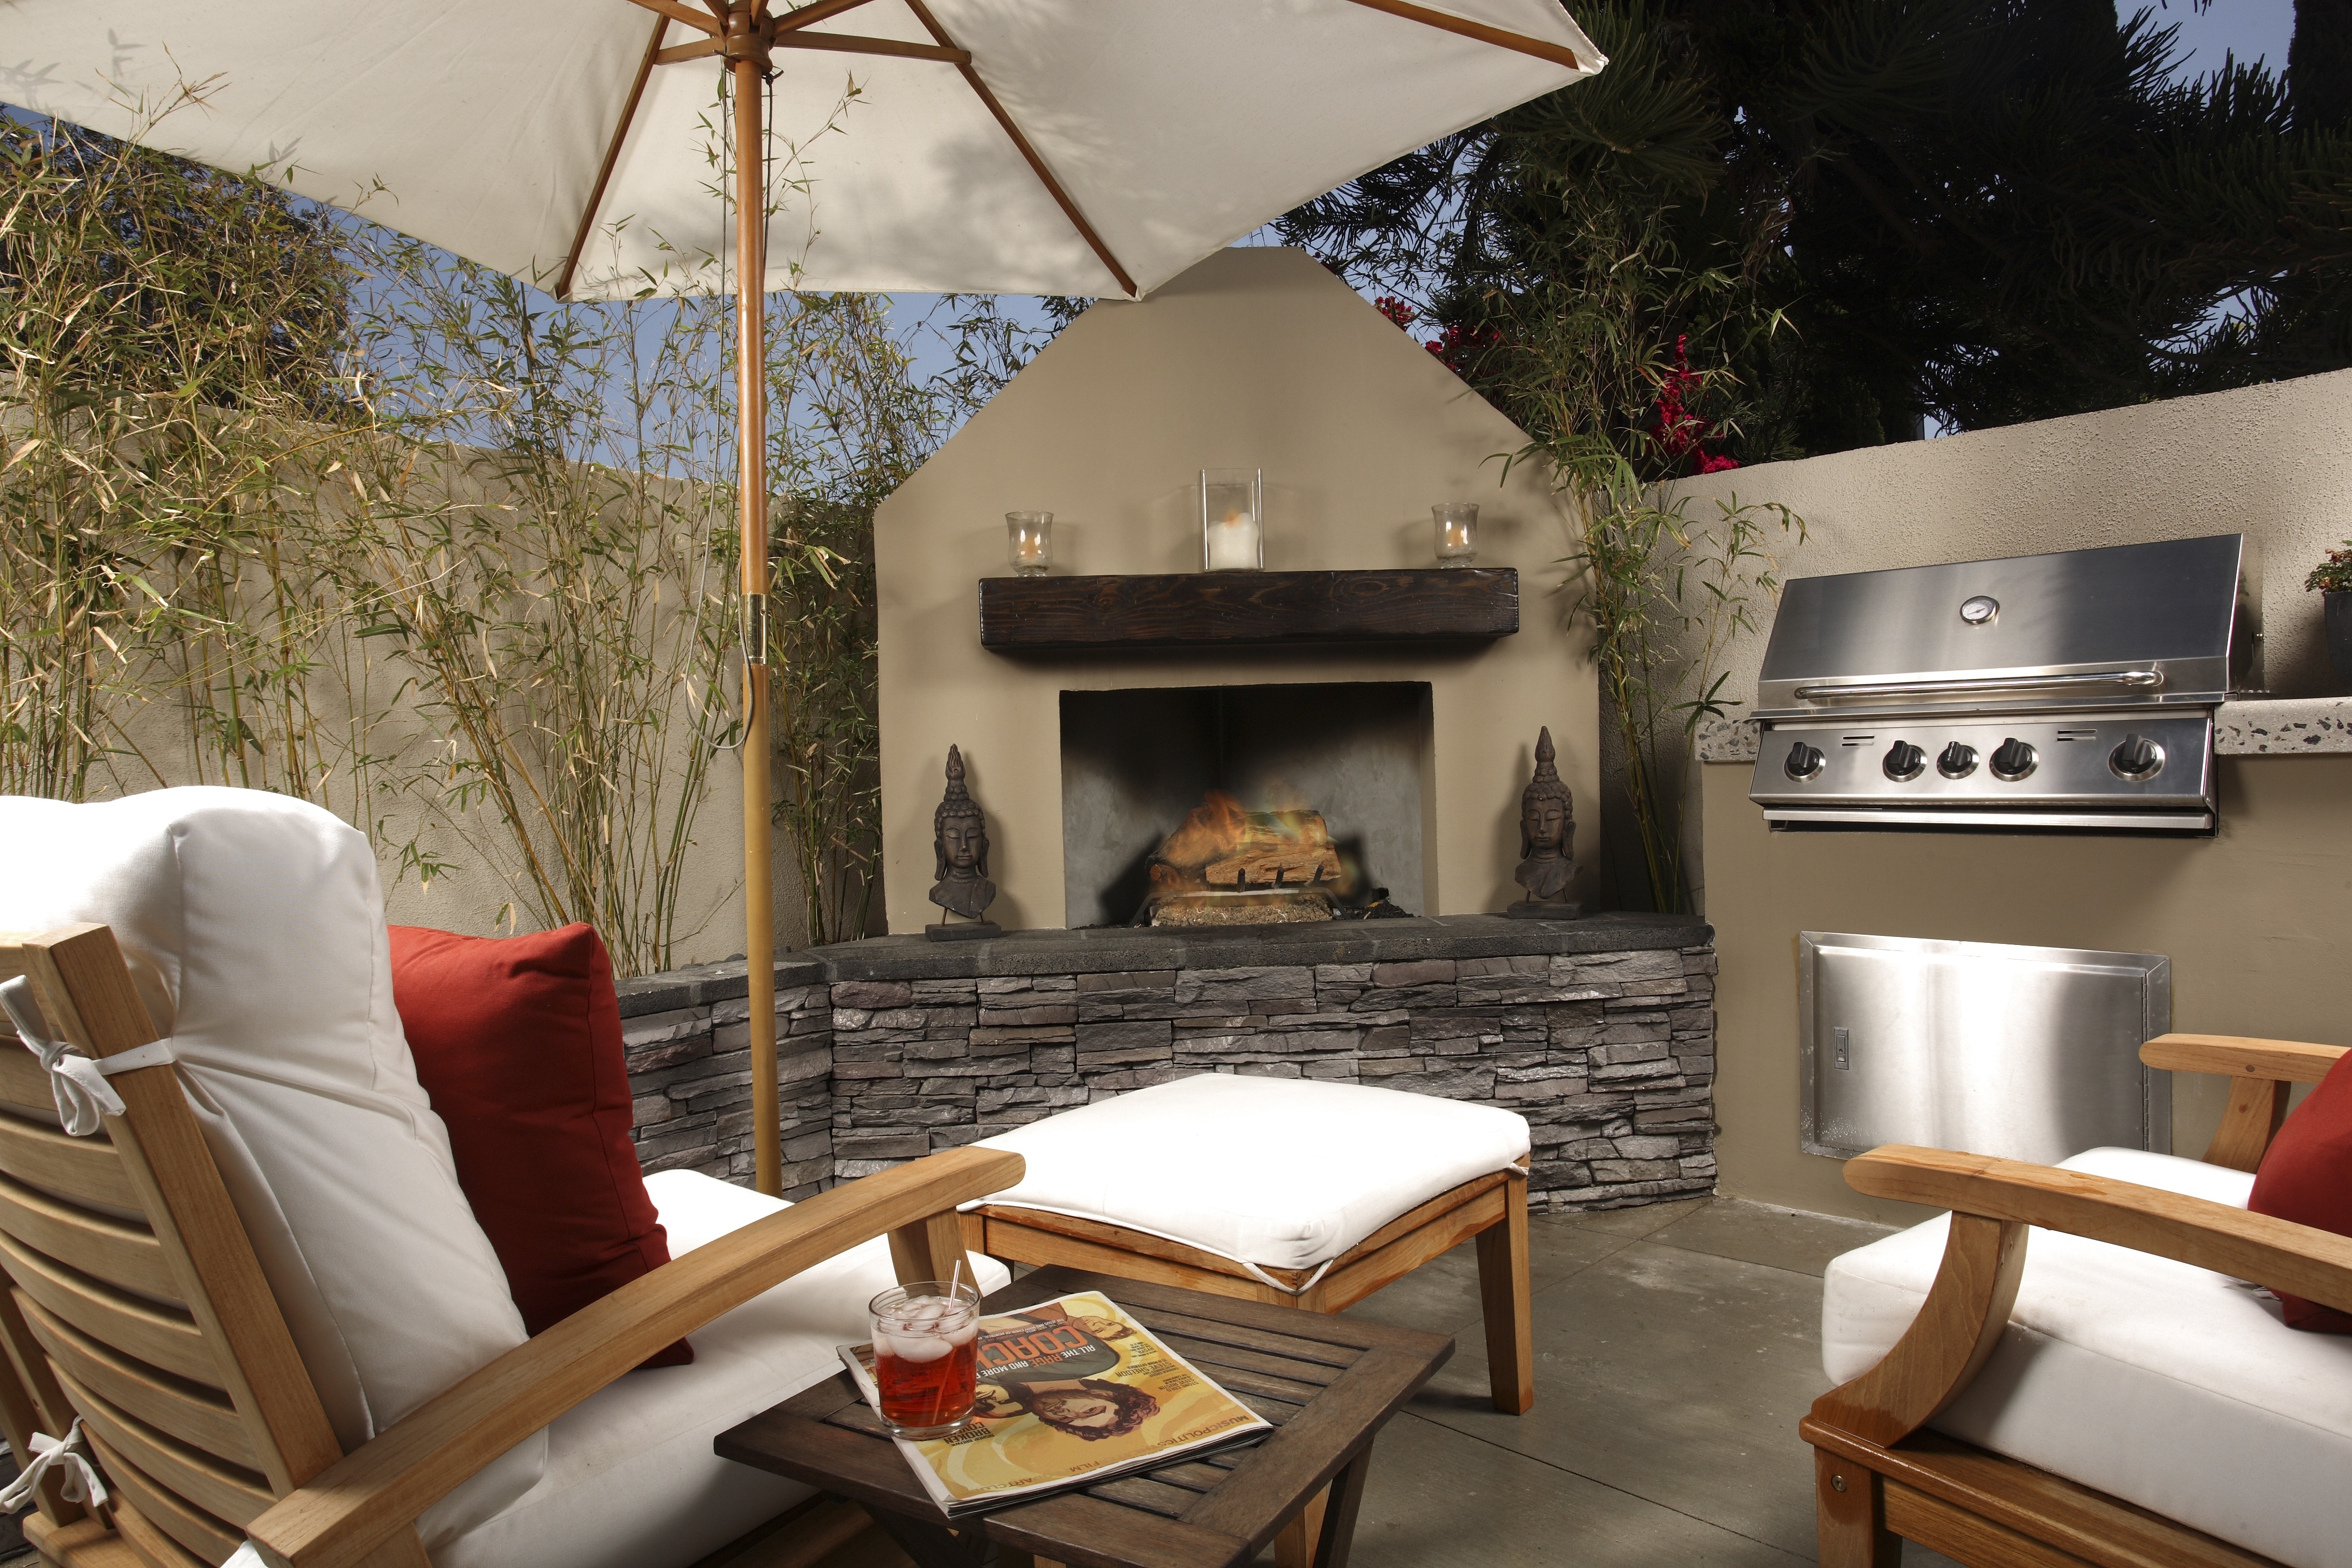 fireplace, range hood patio chair and parasol